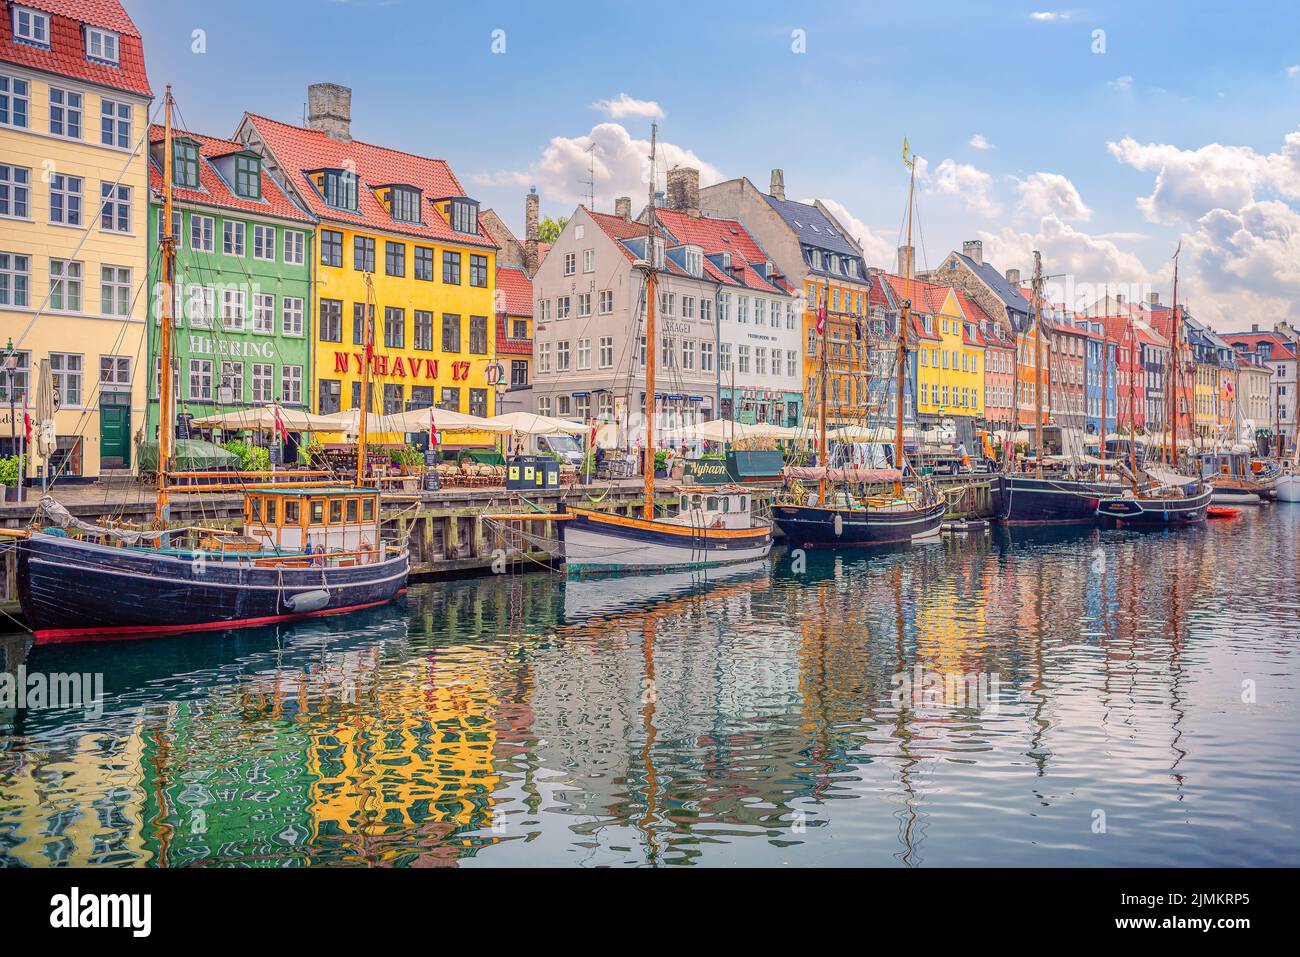 Many popular restaurants, cafes and bars in the old colorful houses on the Nyhavn waterfront. Copenhagen, Denmark. Stock Photo